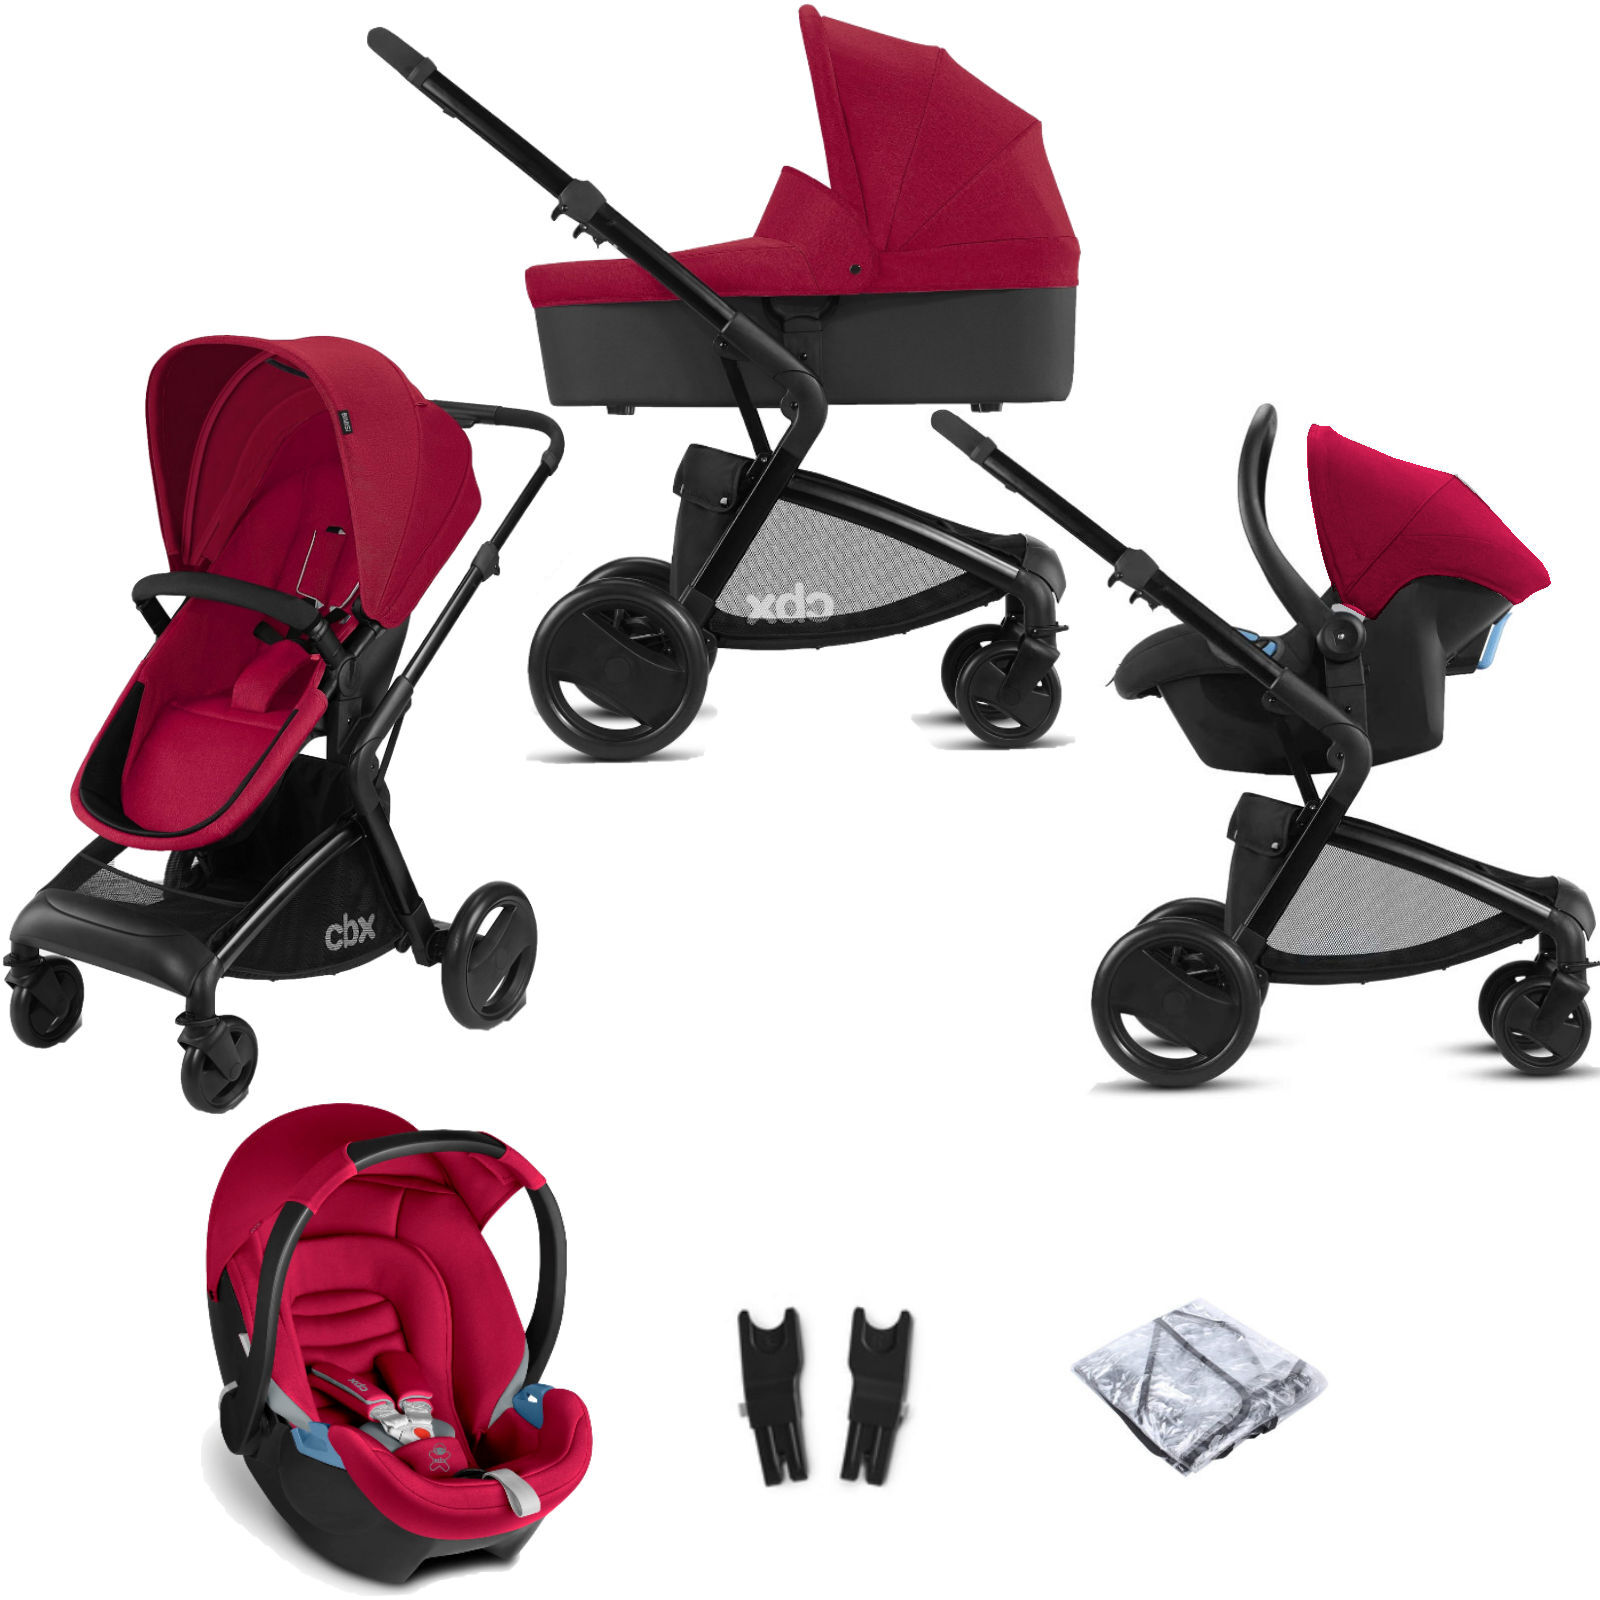 CBX Cybex CBX Bimisi Pure (Aton) Travel System with Carrycot - Crunchy Red